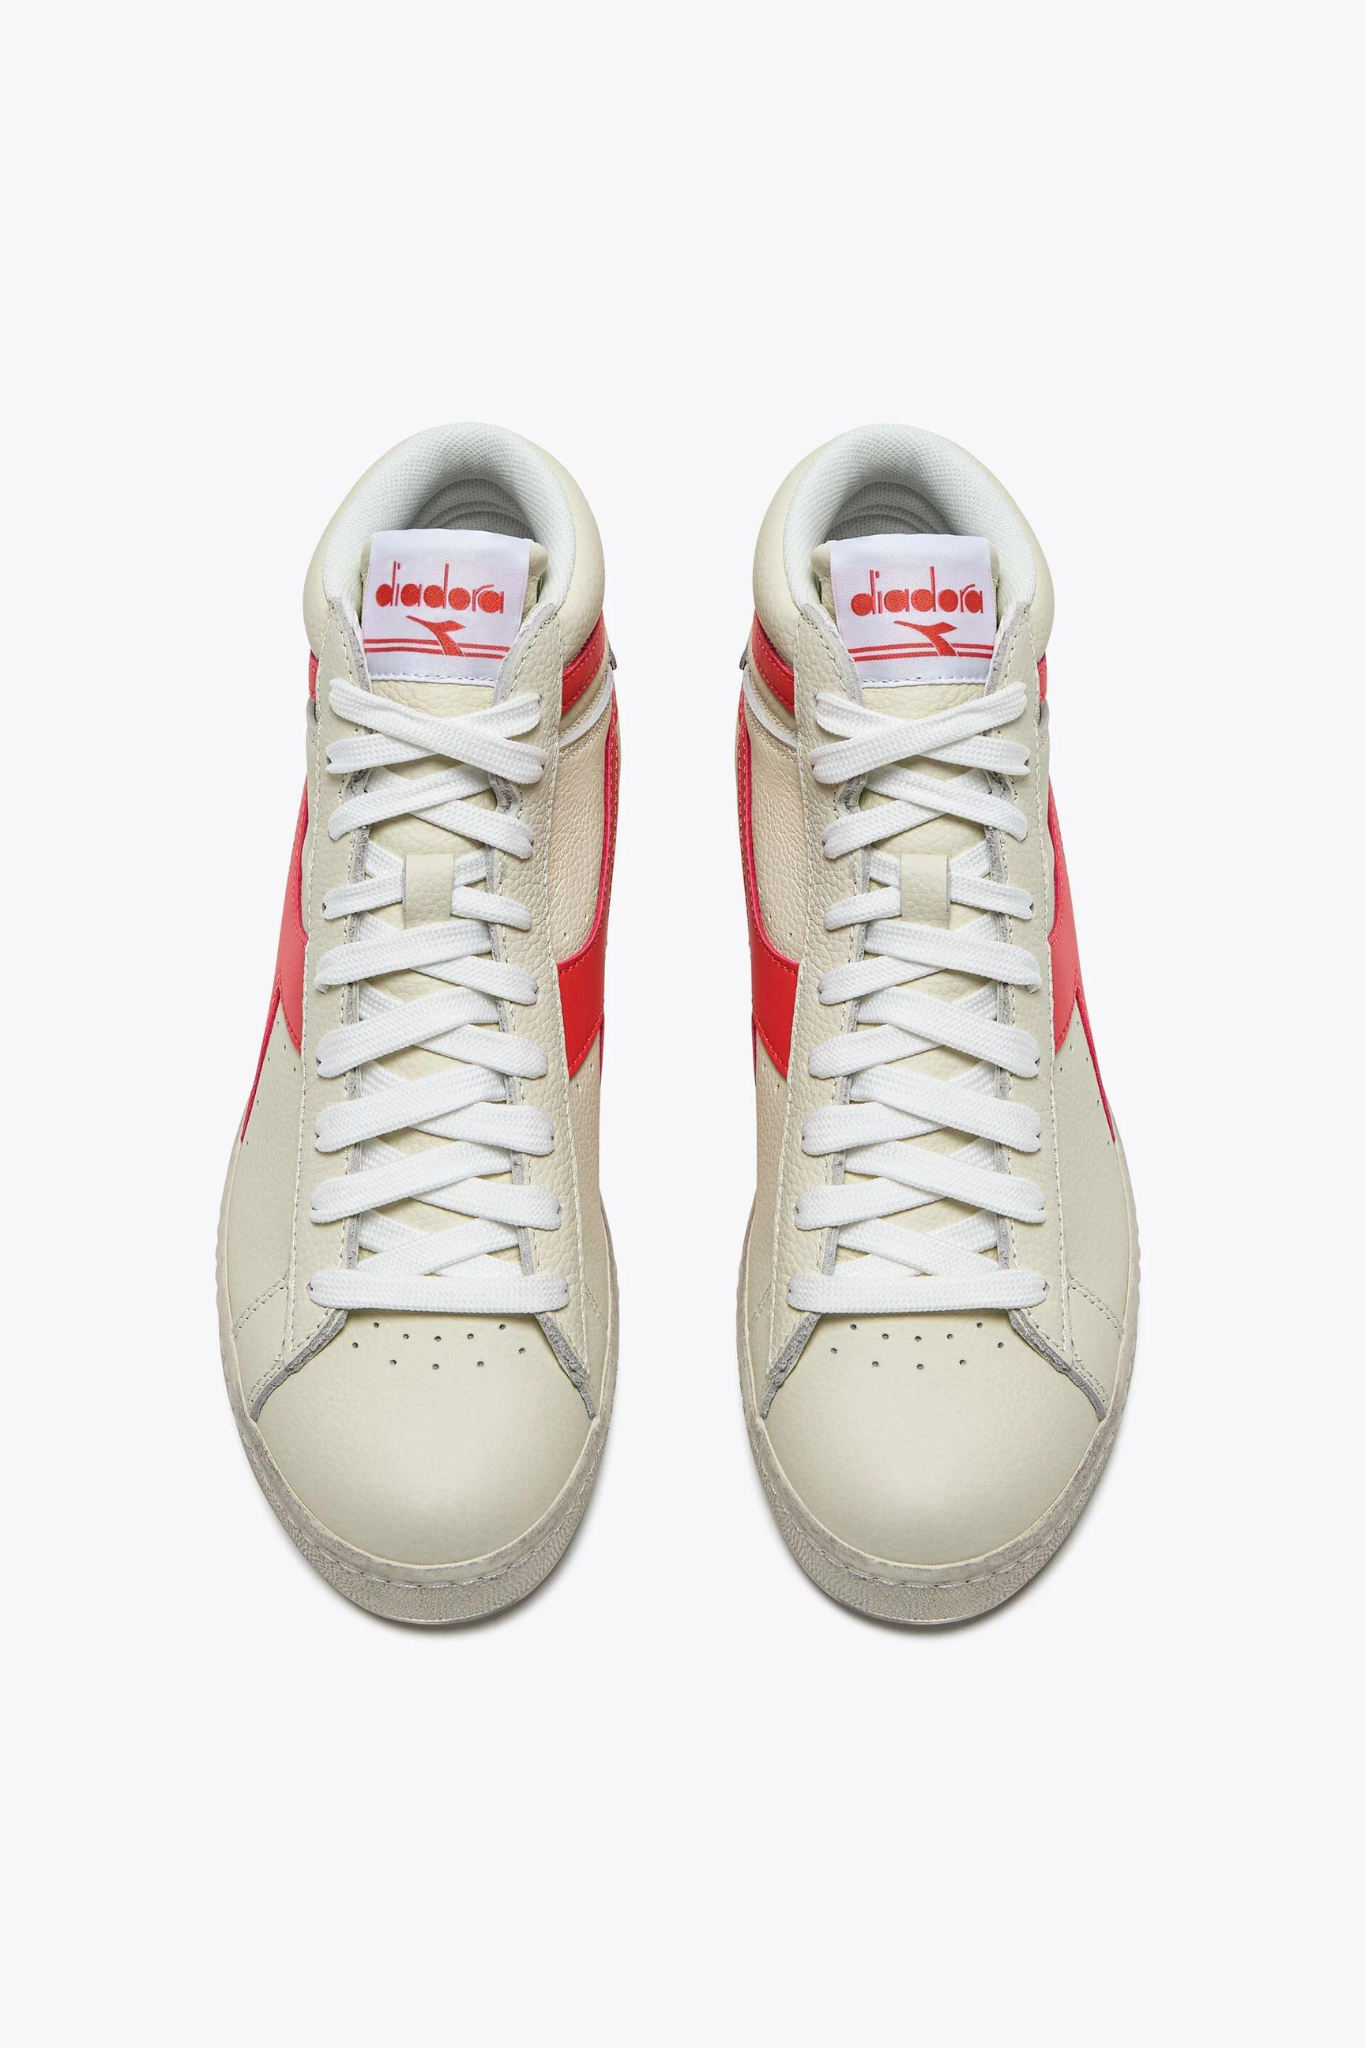 GAME L HIGH FLUO WAXED SNEAKER - SUPER WHITE/HOT CORAL